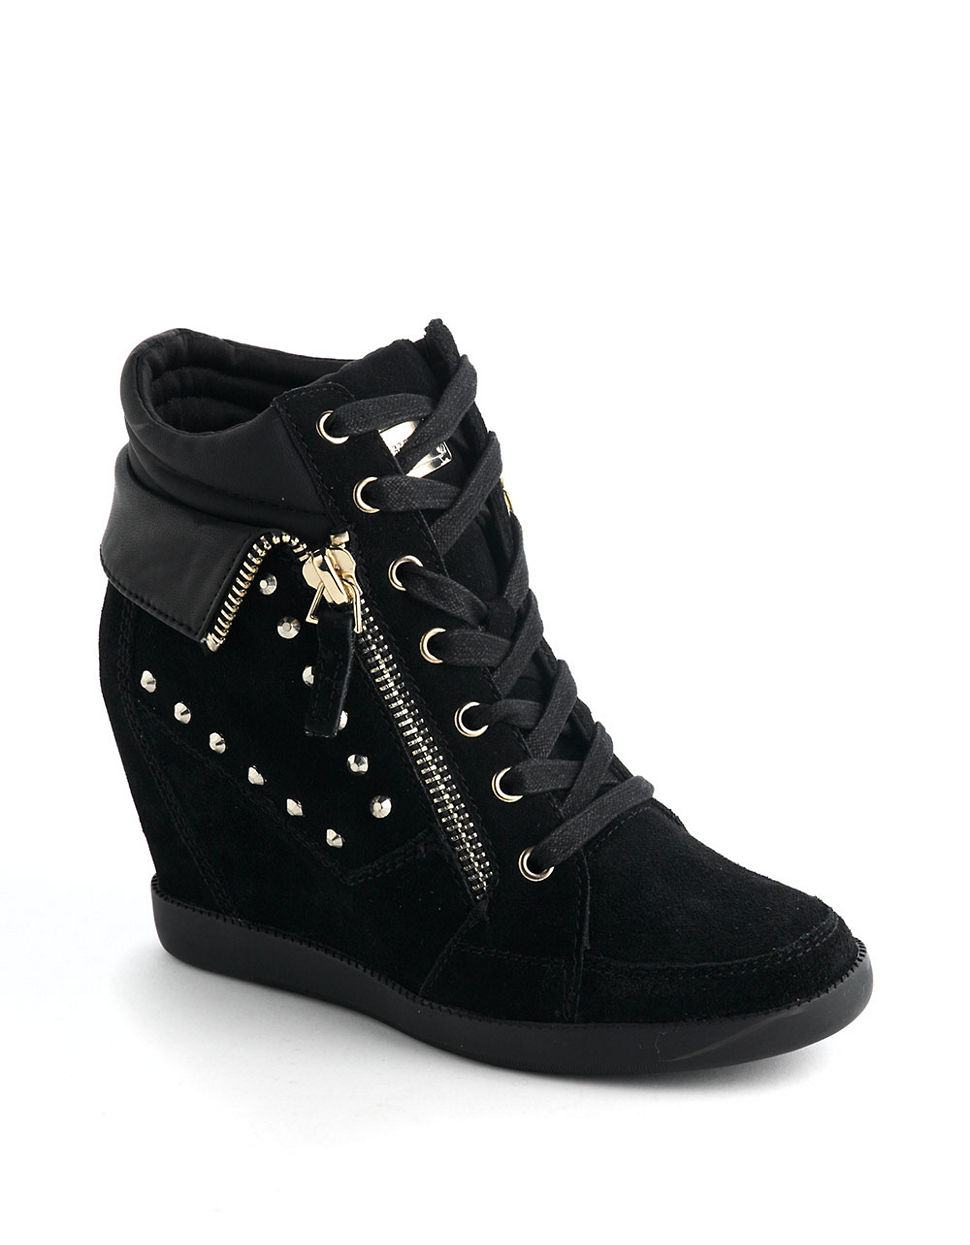 Lyst - Guess Hitzo Studded Suede Hidden Wedge Sneakers in Black